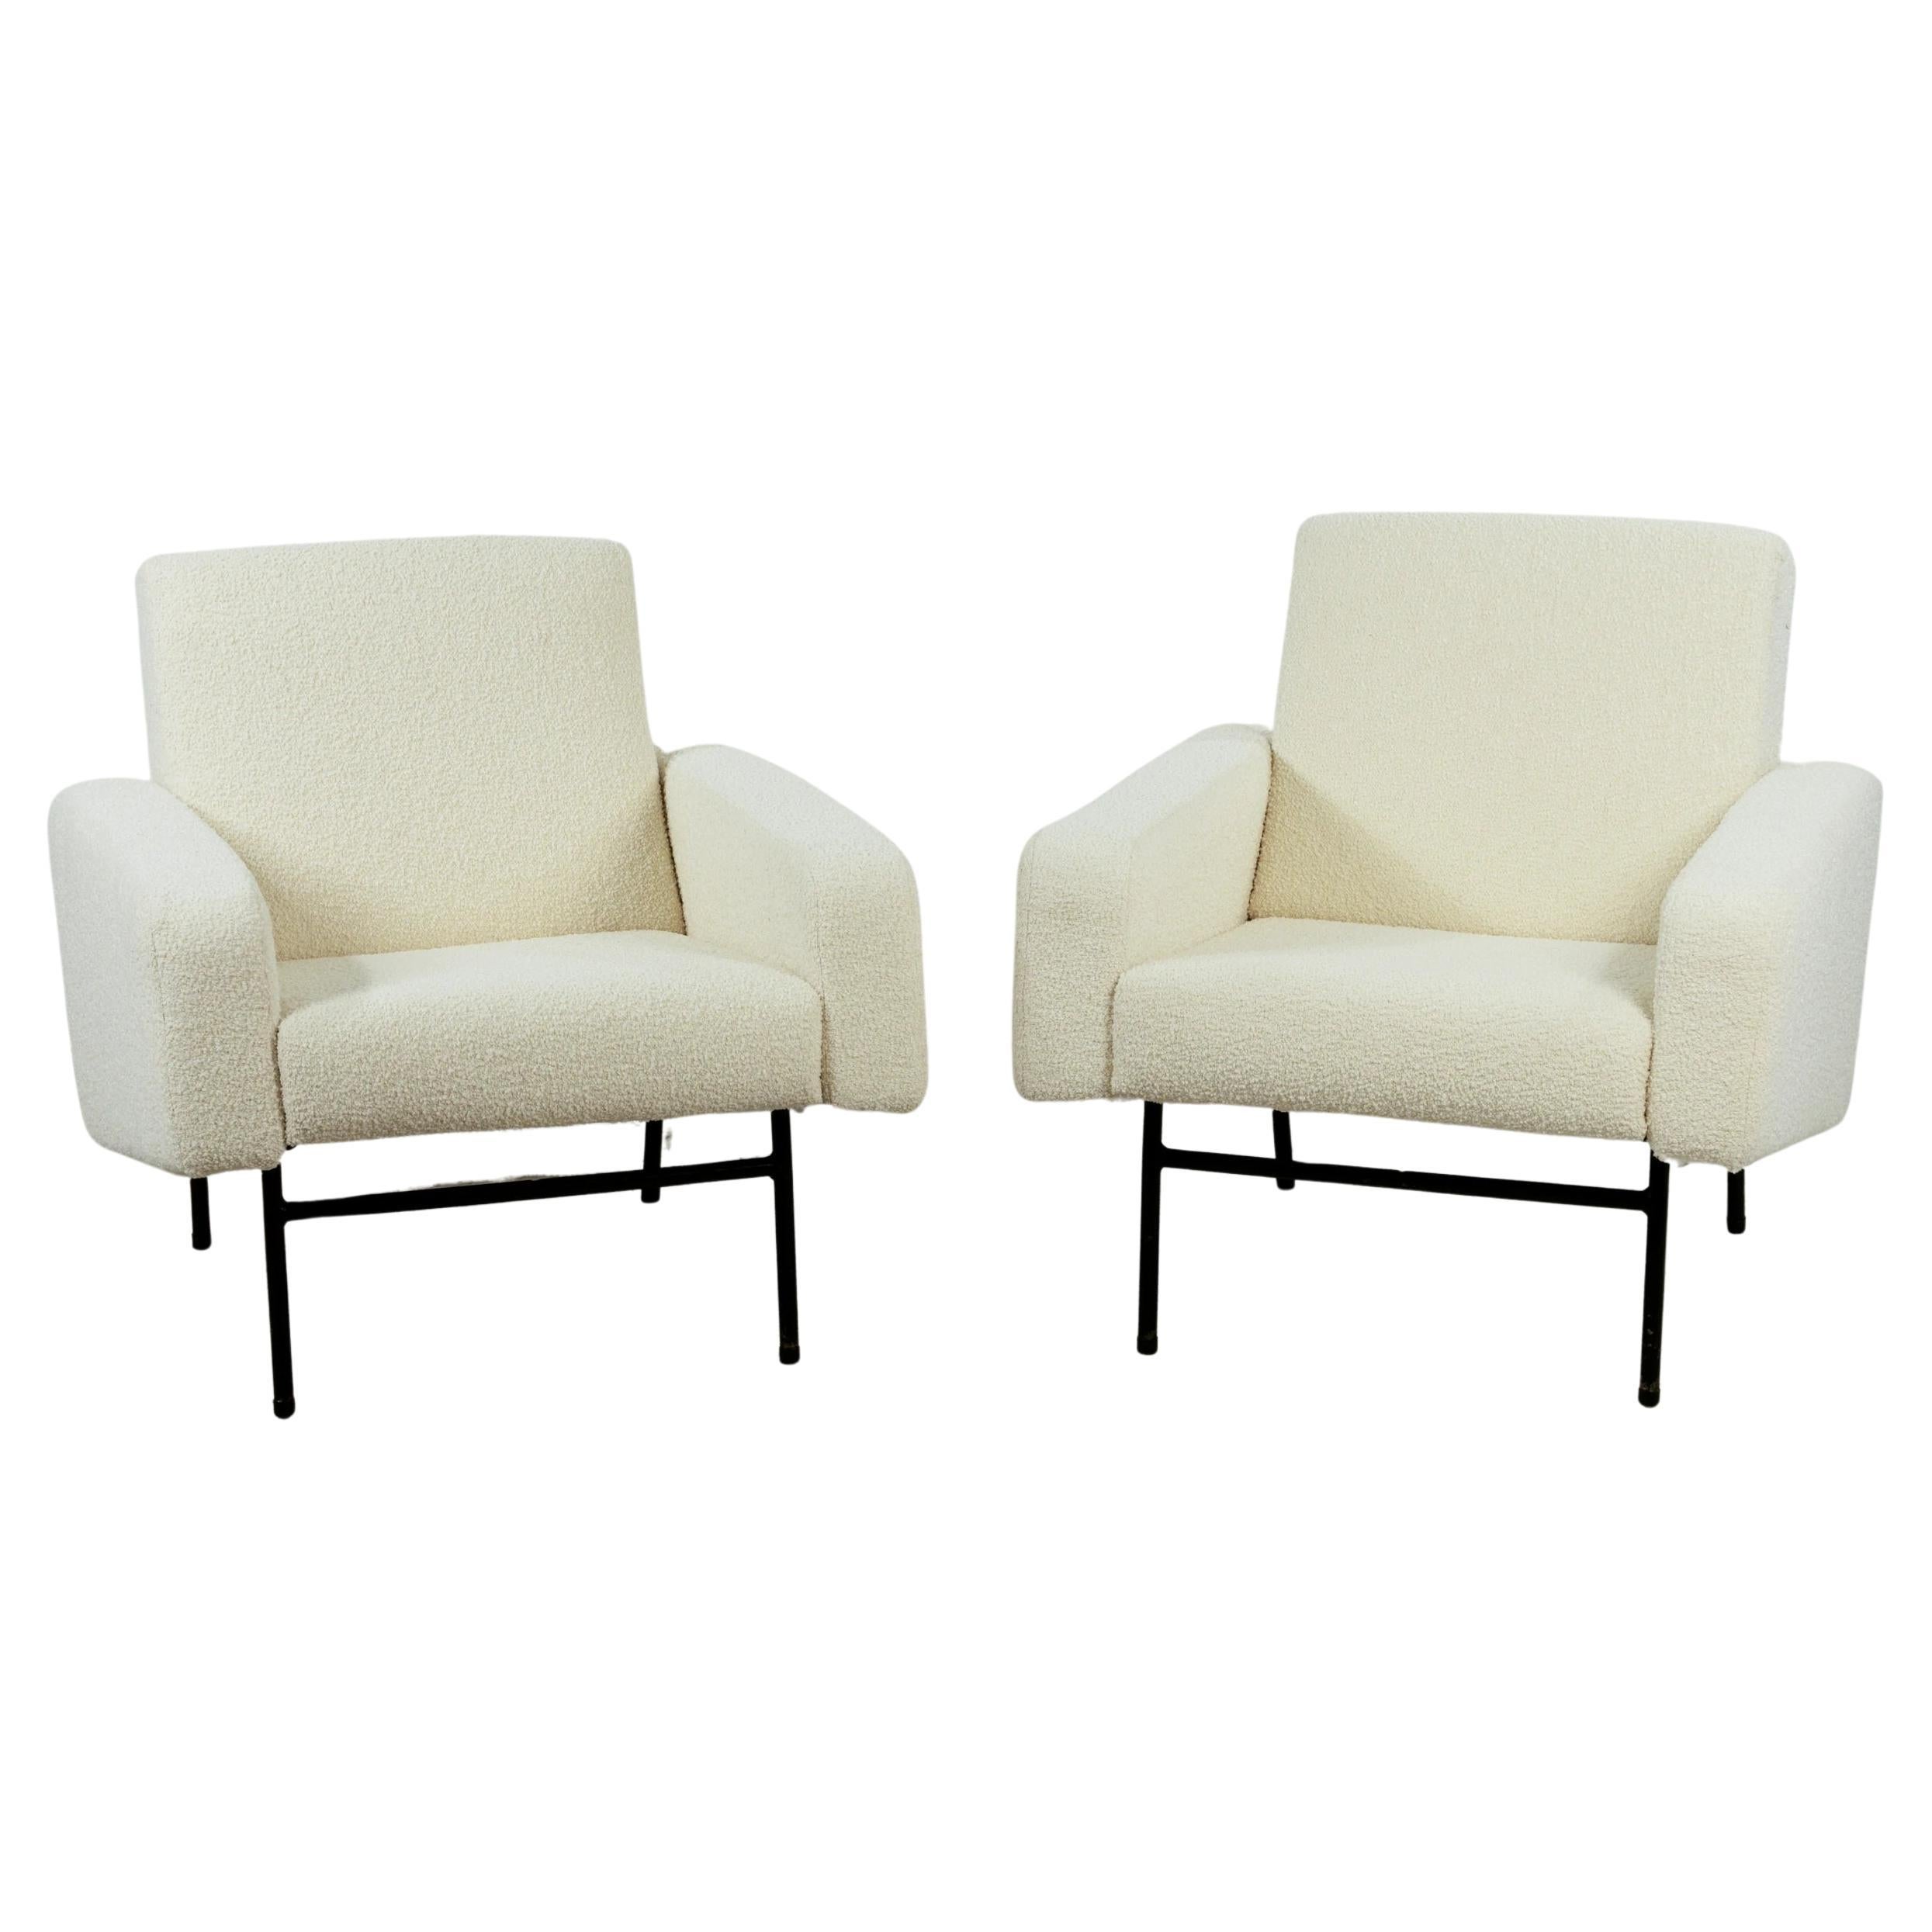 Pair of G 10 armchairs by Pierre Guariche, Editions Airborne, France, circa 1960 For Sale